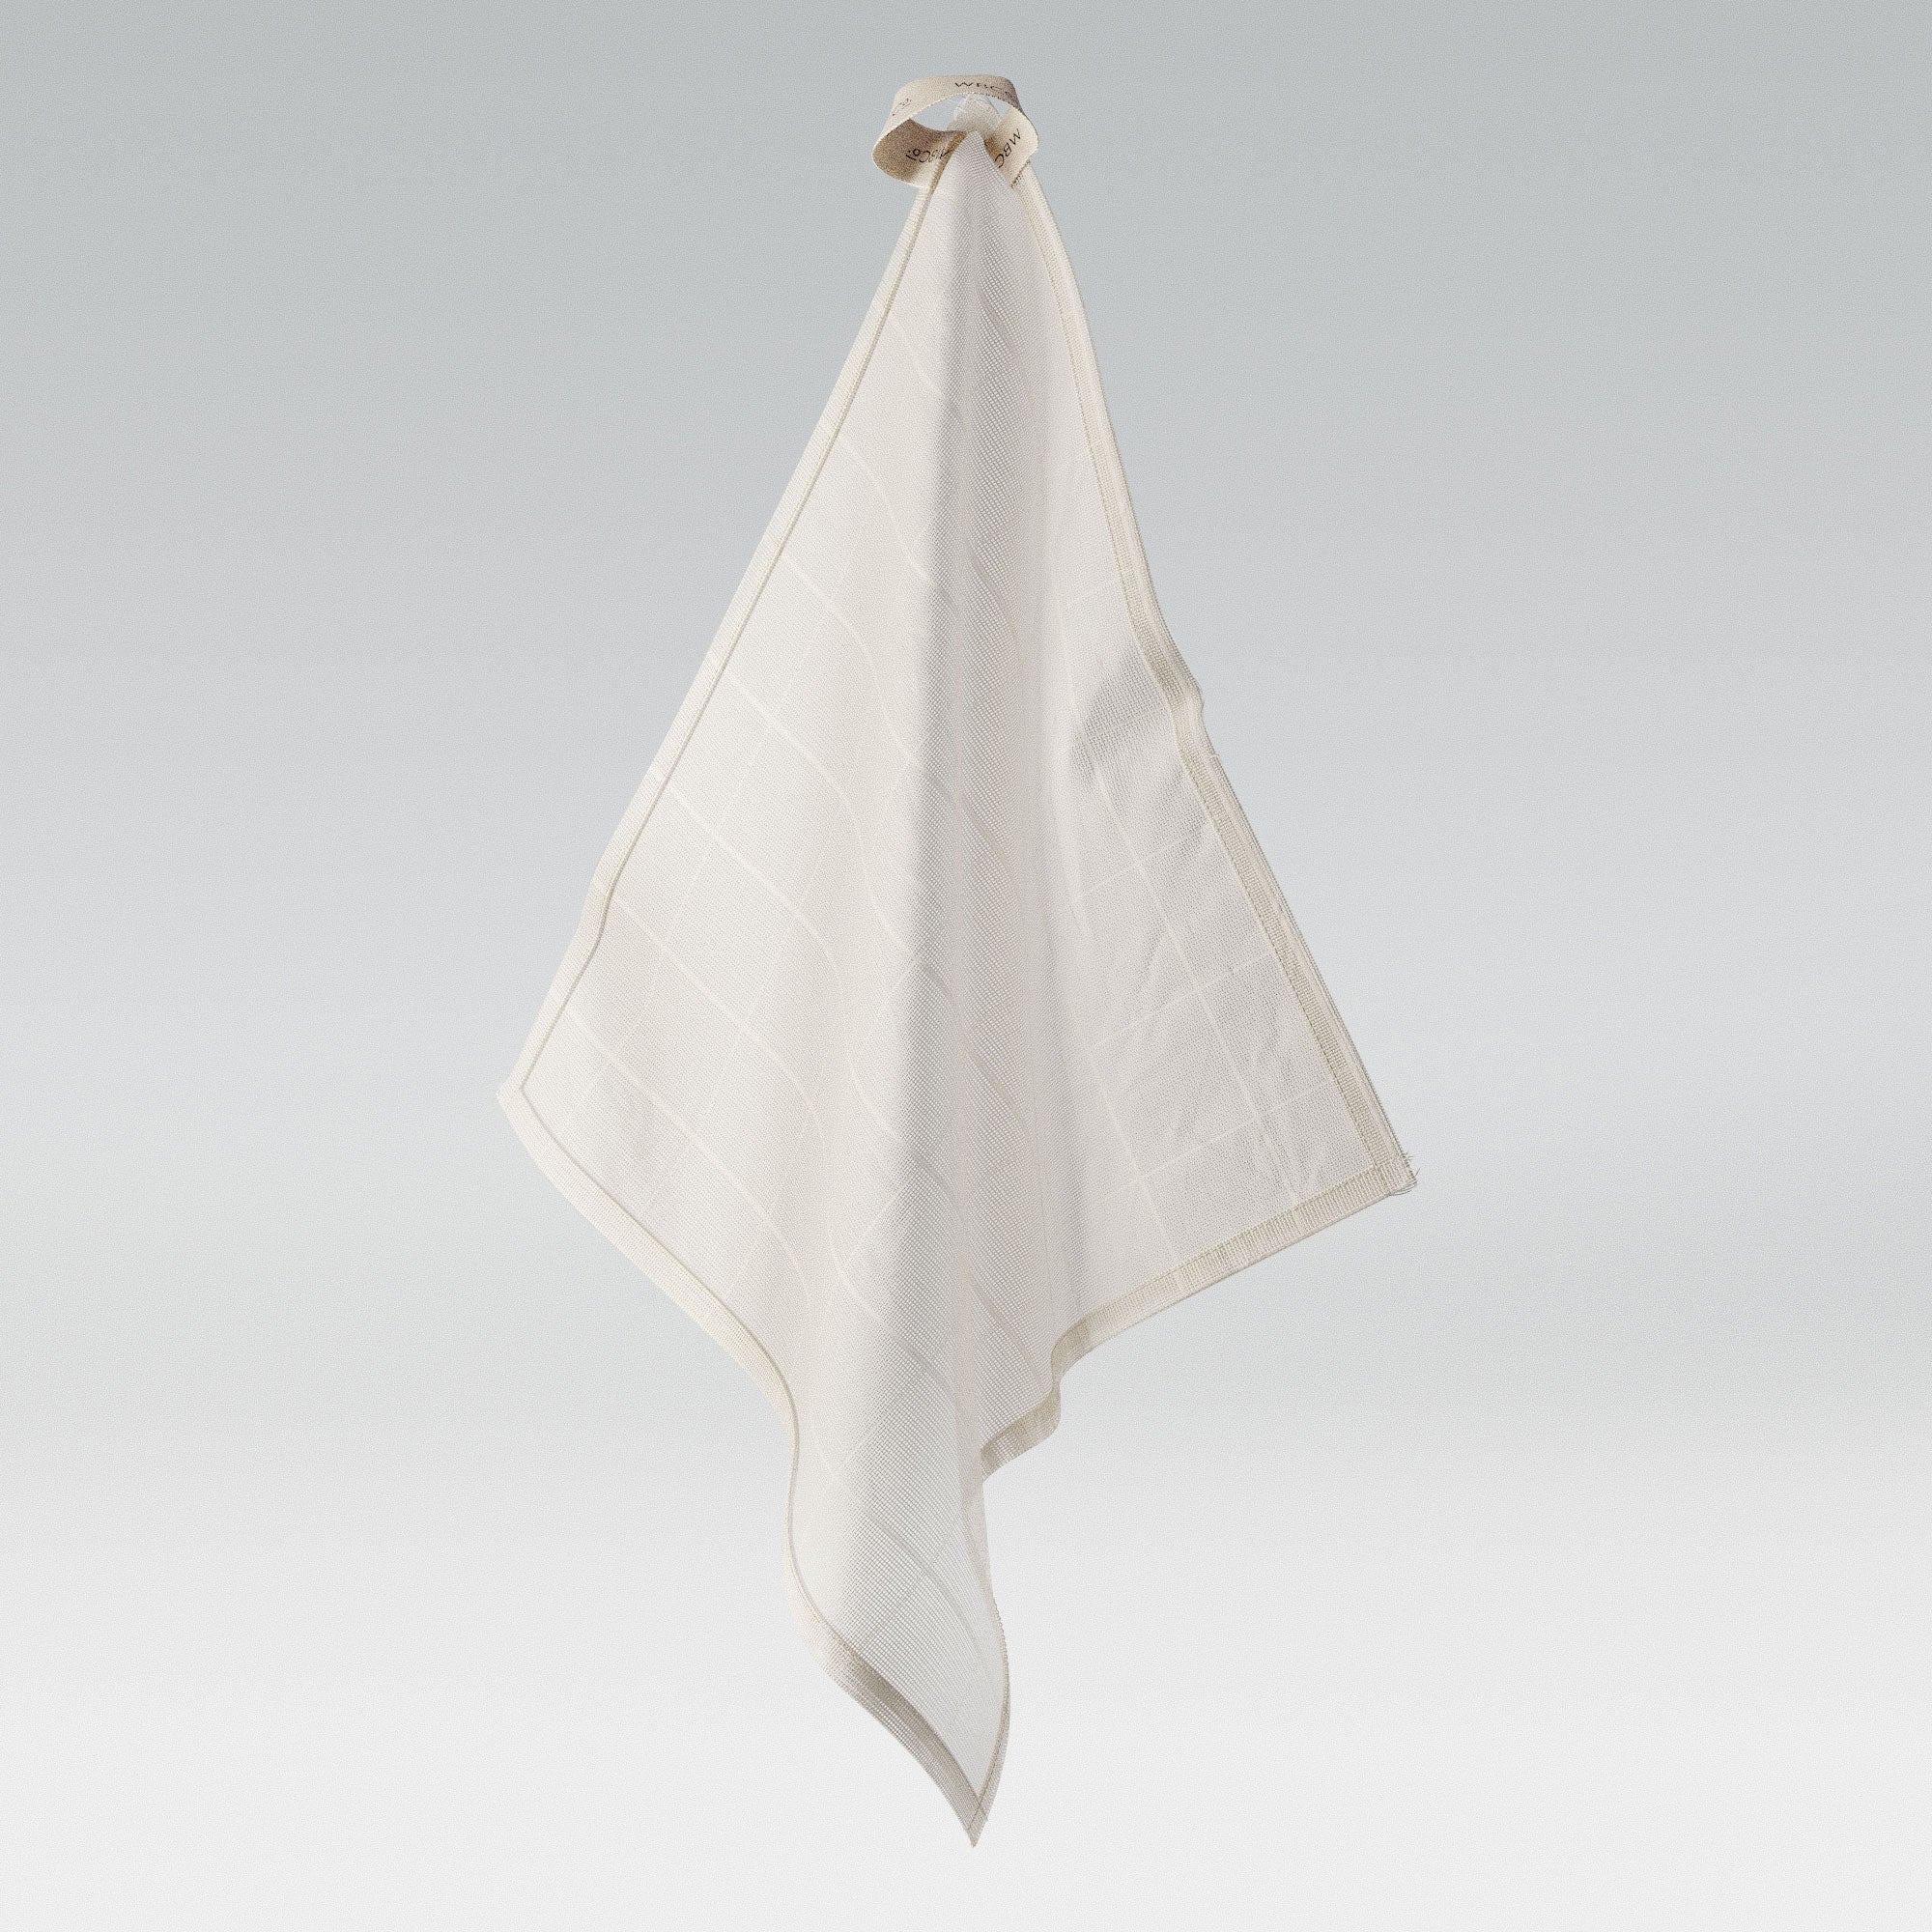 ORGANIC COTTON AND BAMBOO CLOTHS PACK-WESTBARNCO-HBYTALA